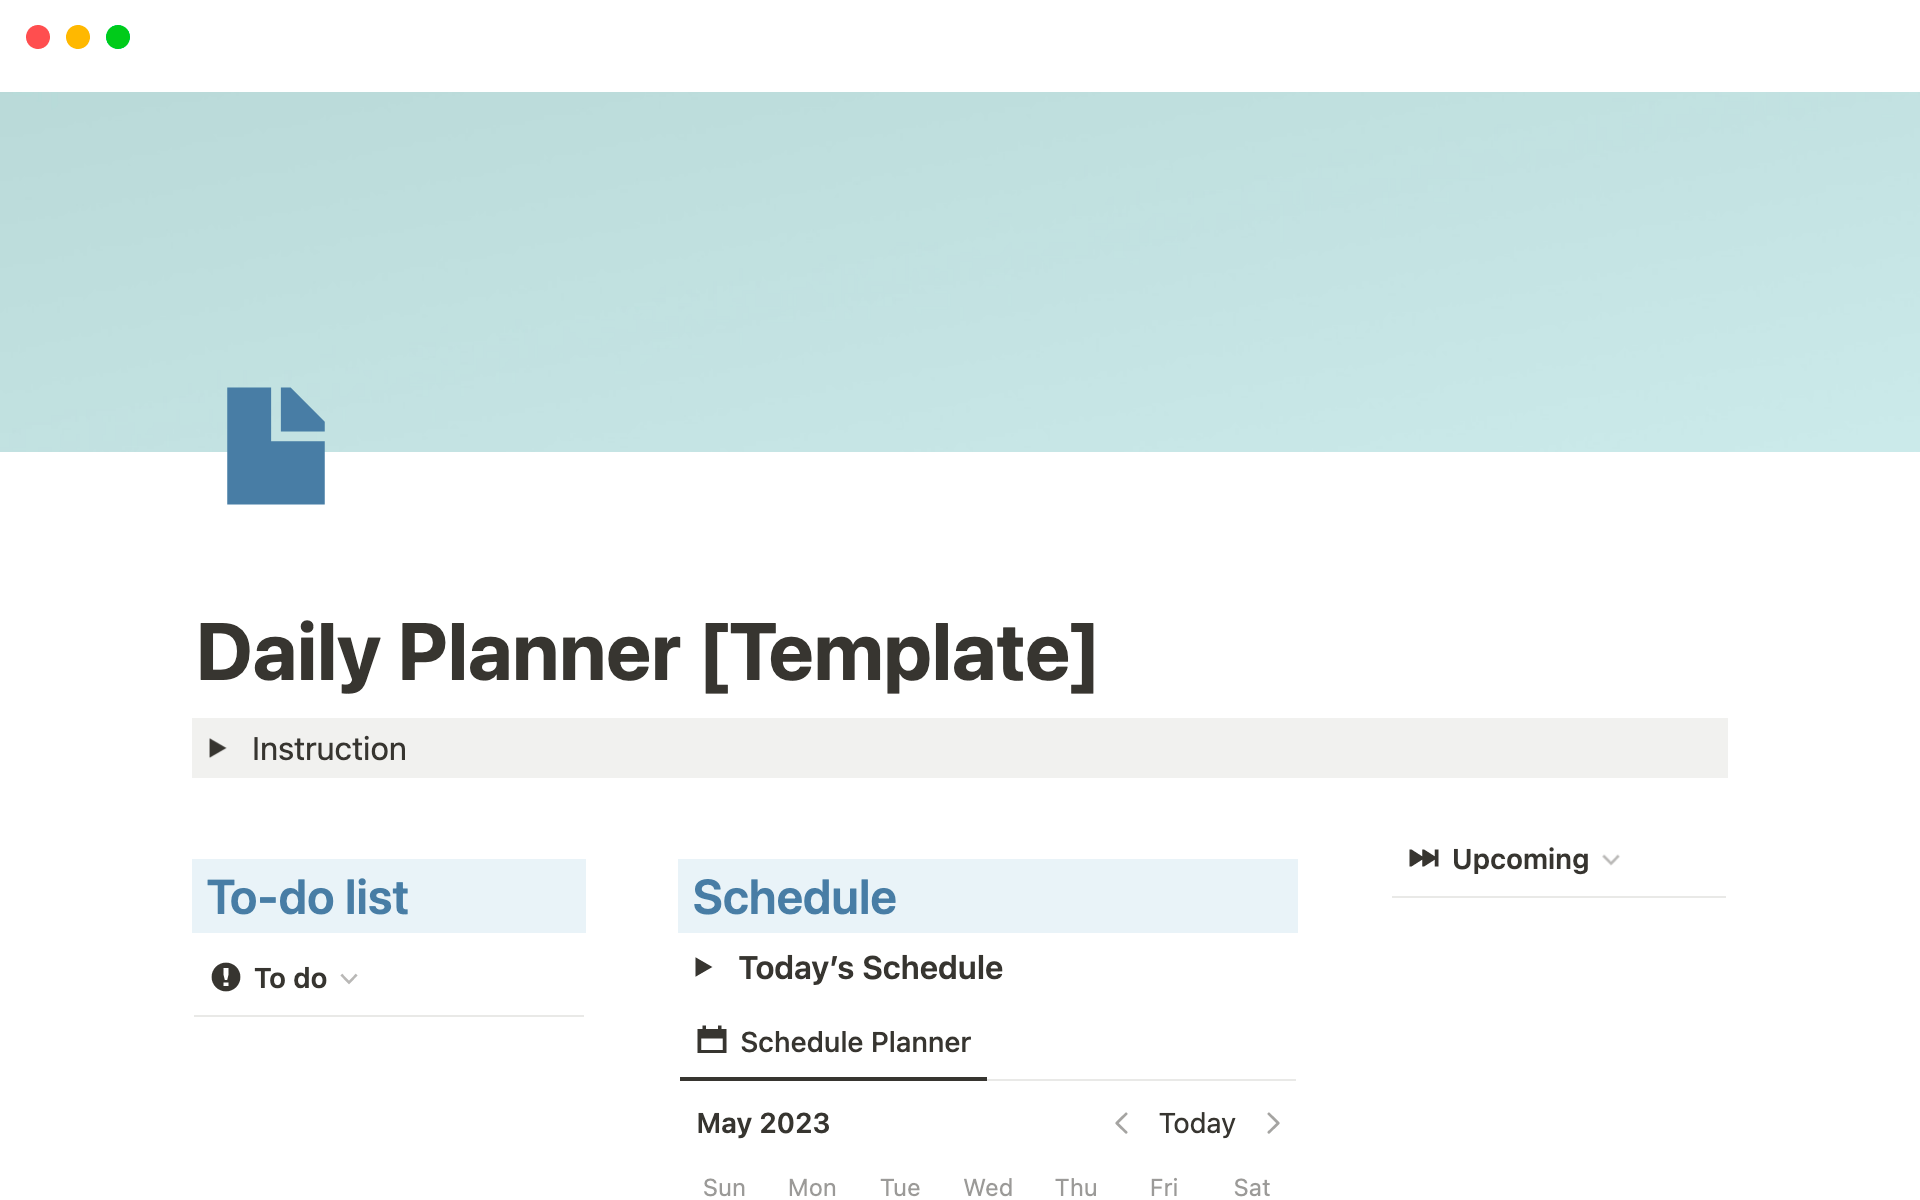 This Notion template for daily planning enables users to efficiently organize and track their daily activities and schedule with a to-do list for the day